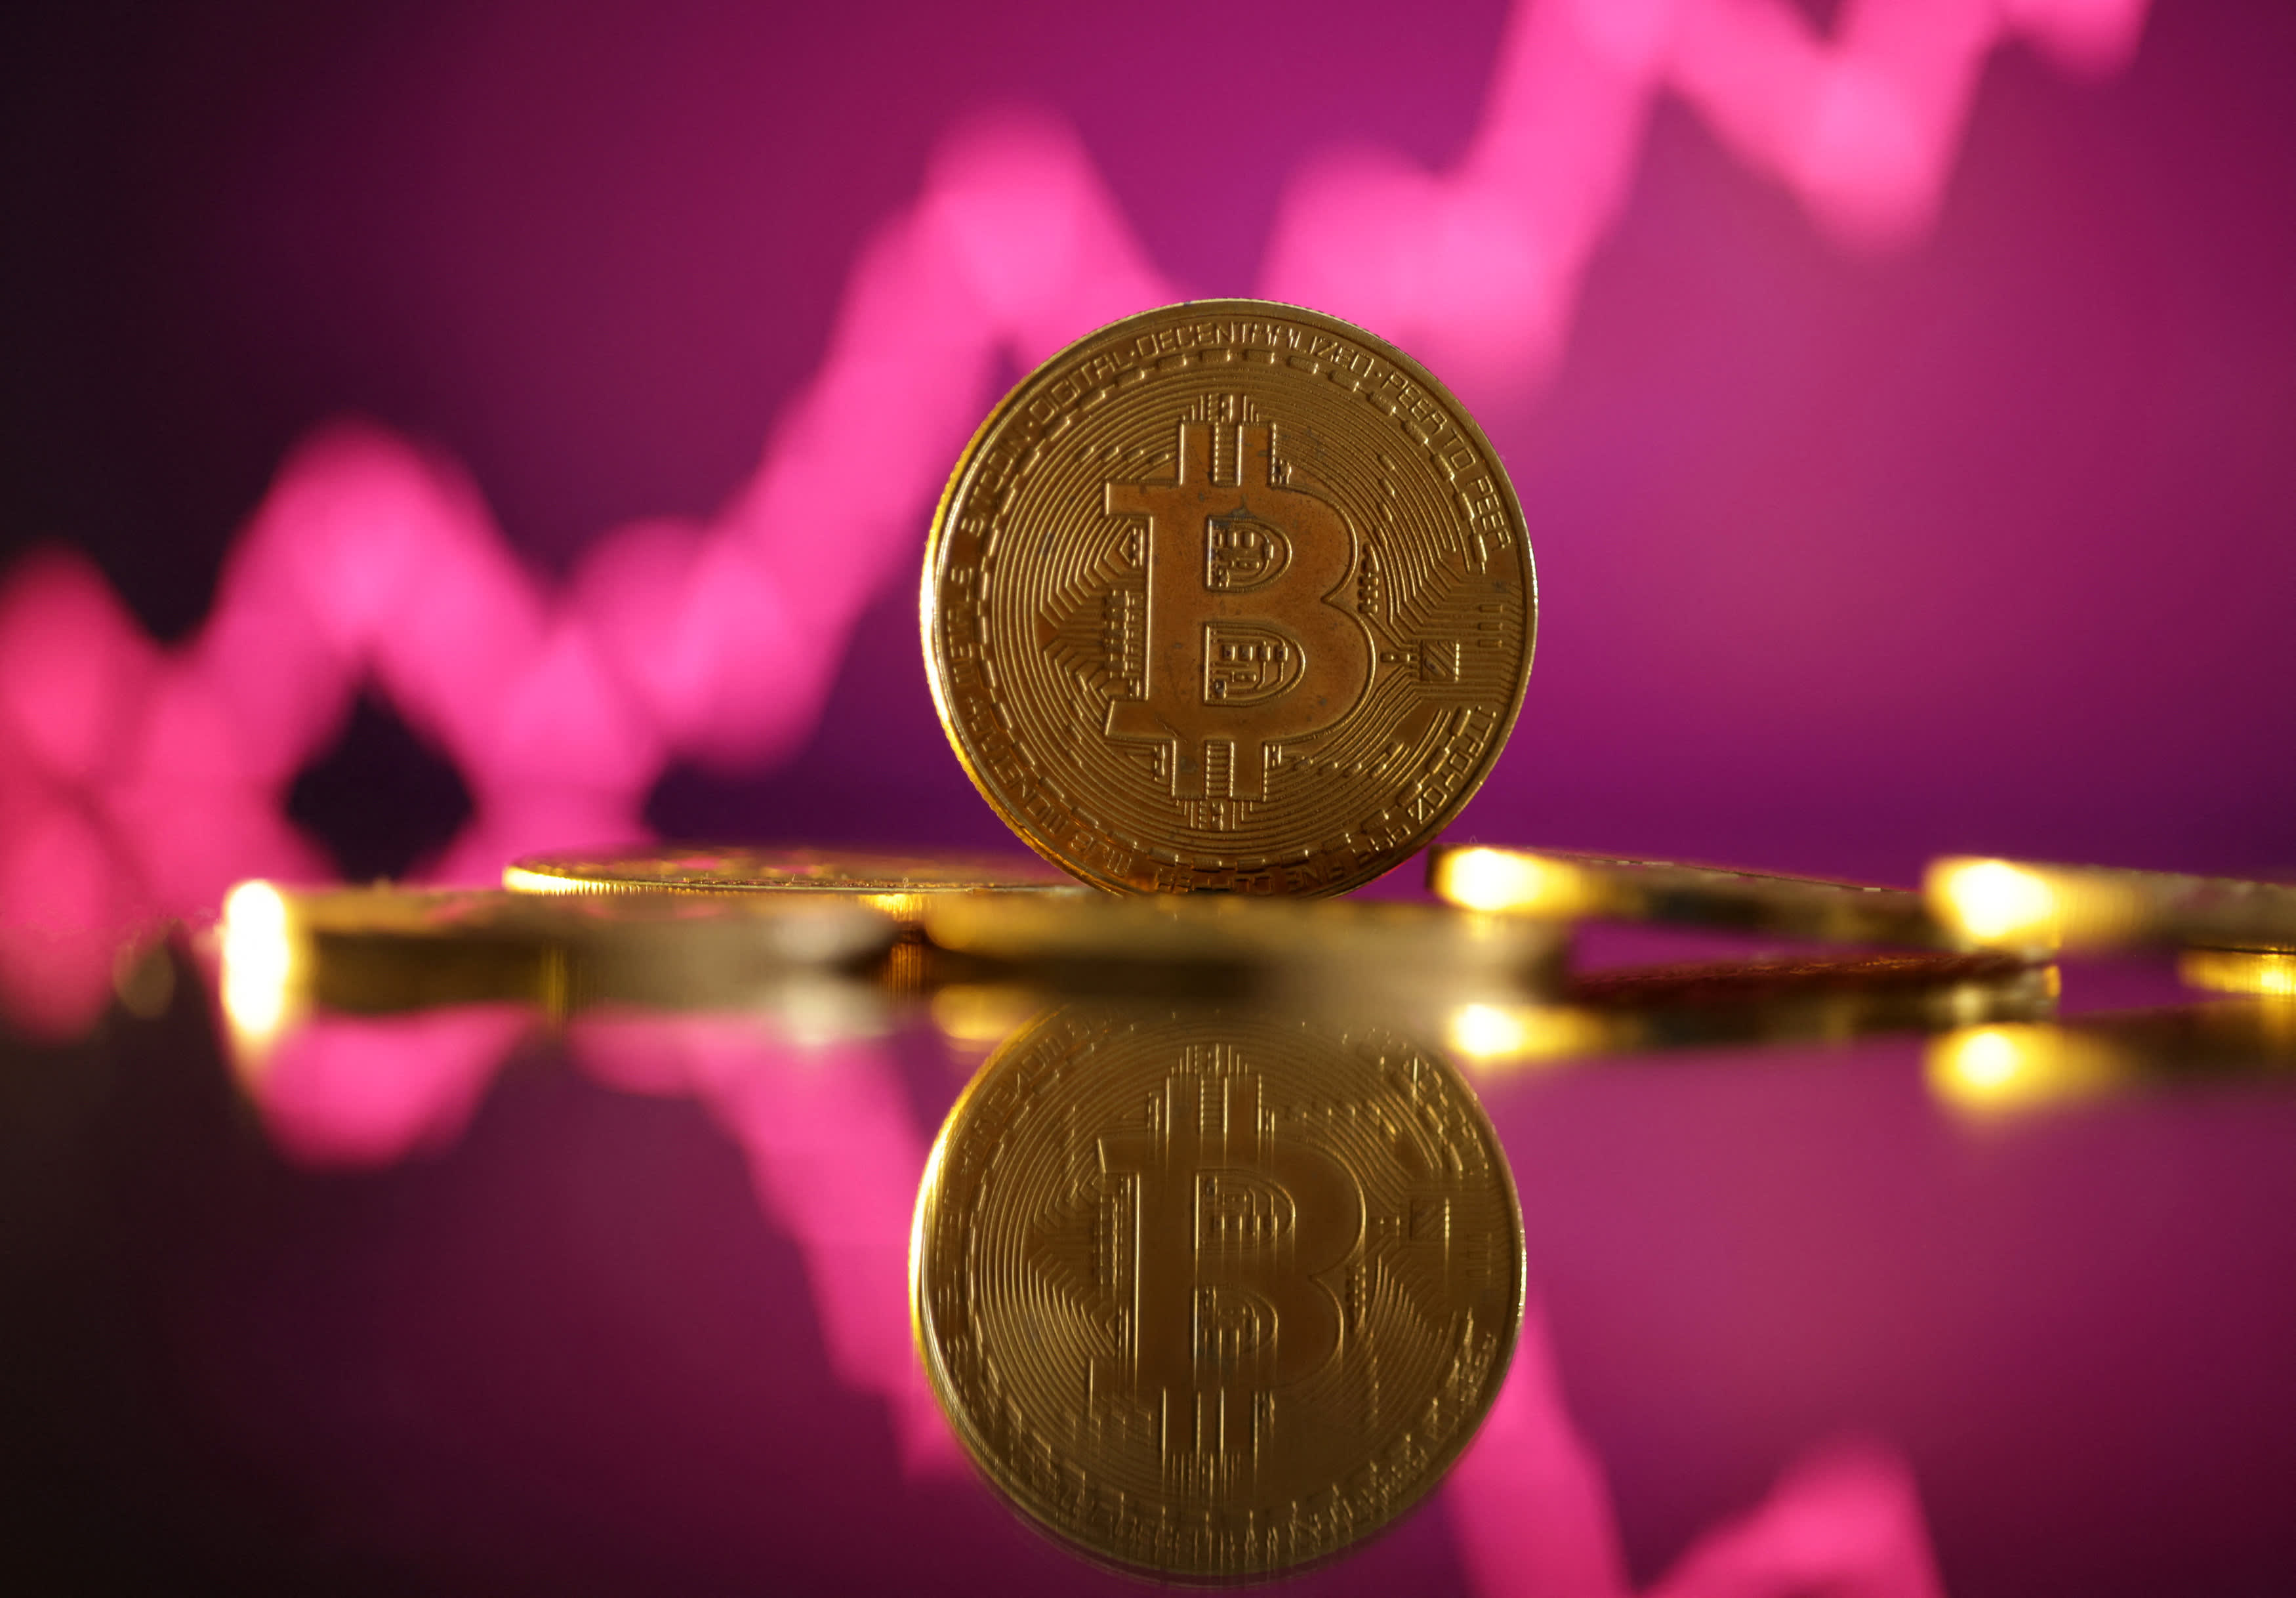 Bitcoin tops $45,000 for the first time since April 2022 as wild crypto rally continues